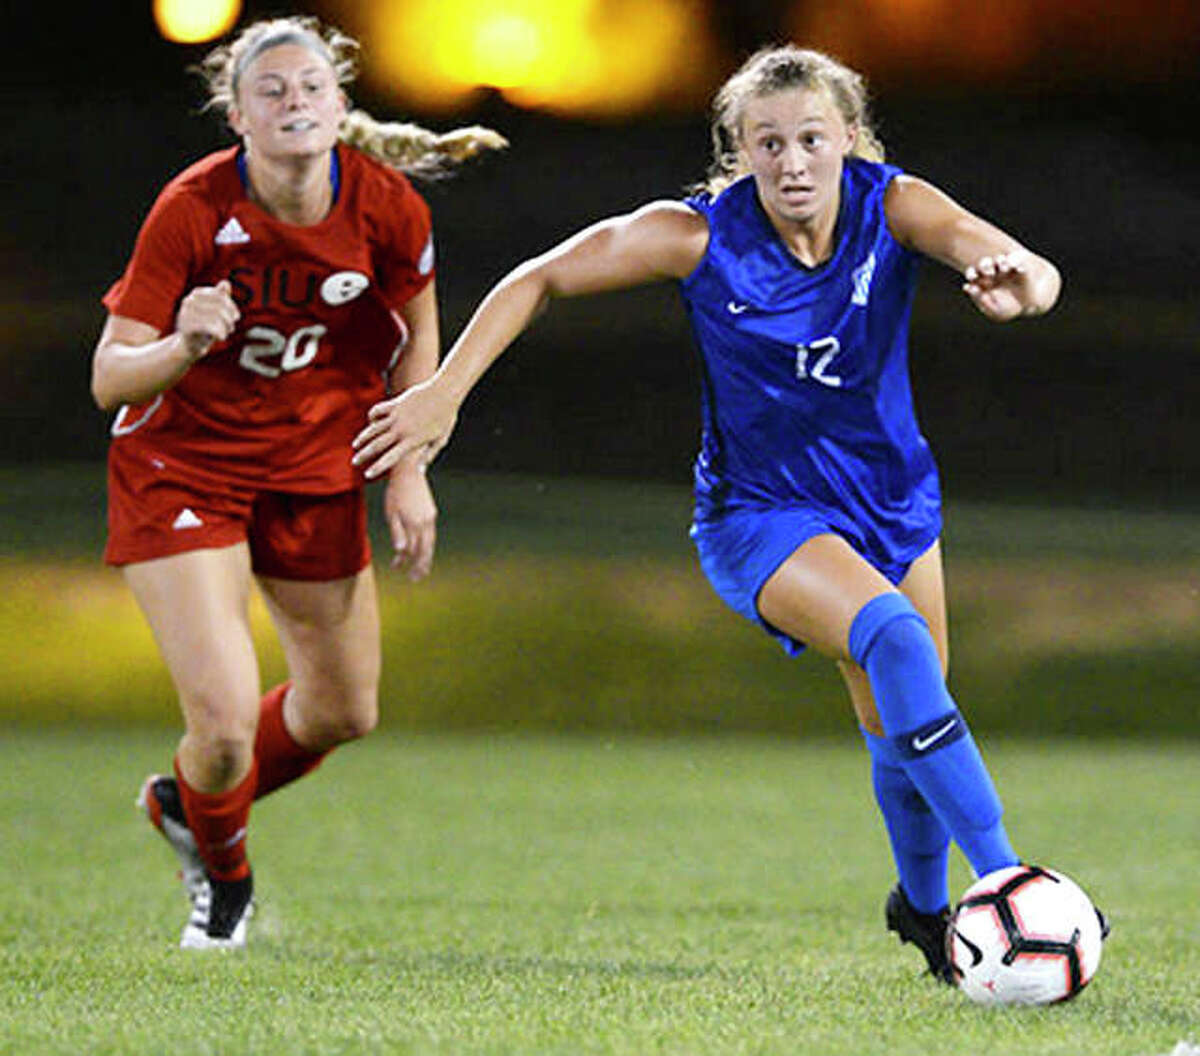 Brianna Halverson pf Saint Louis University (12) moves the ball past SIUE’s Courtney Benning in exhibition action Tuesday night at Saint Louis U’s Hermann Stadium. The Billikens beat SIUE 2-0.